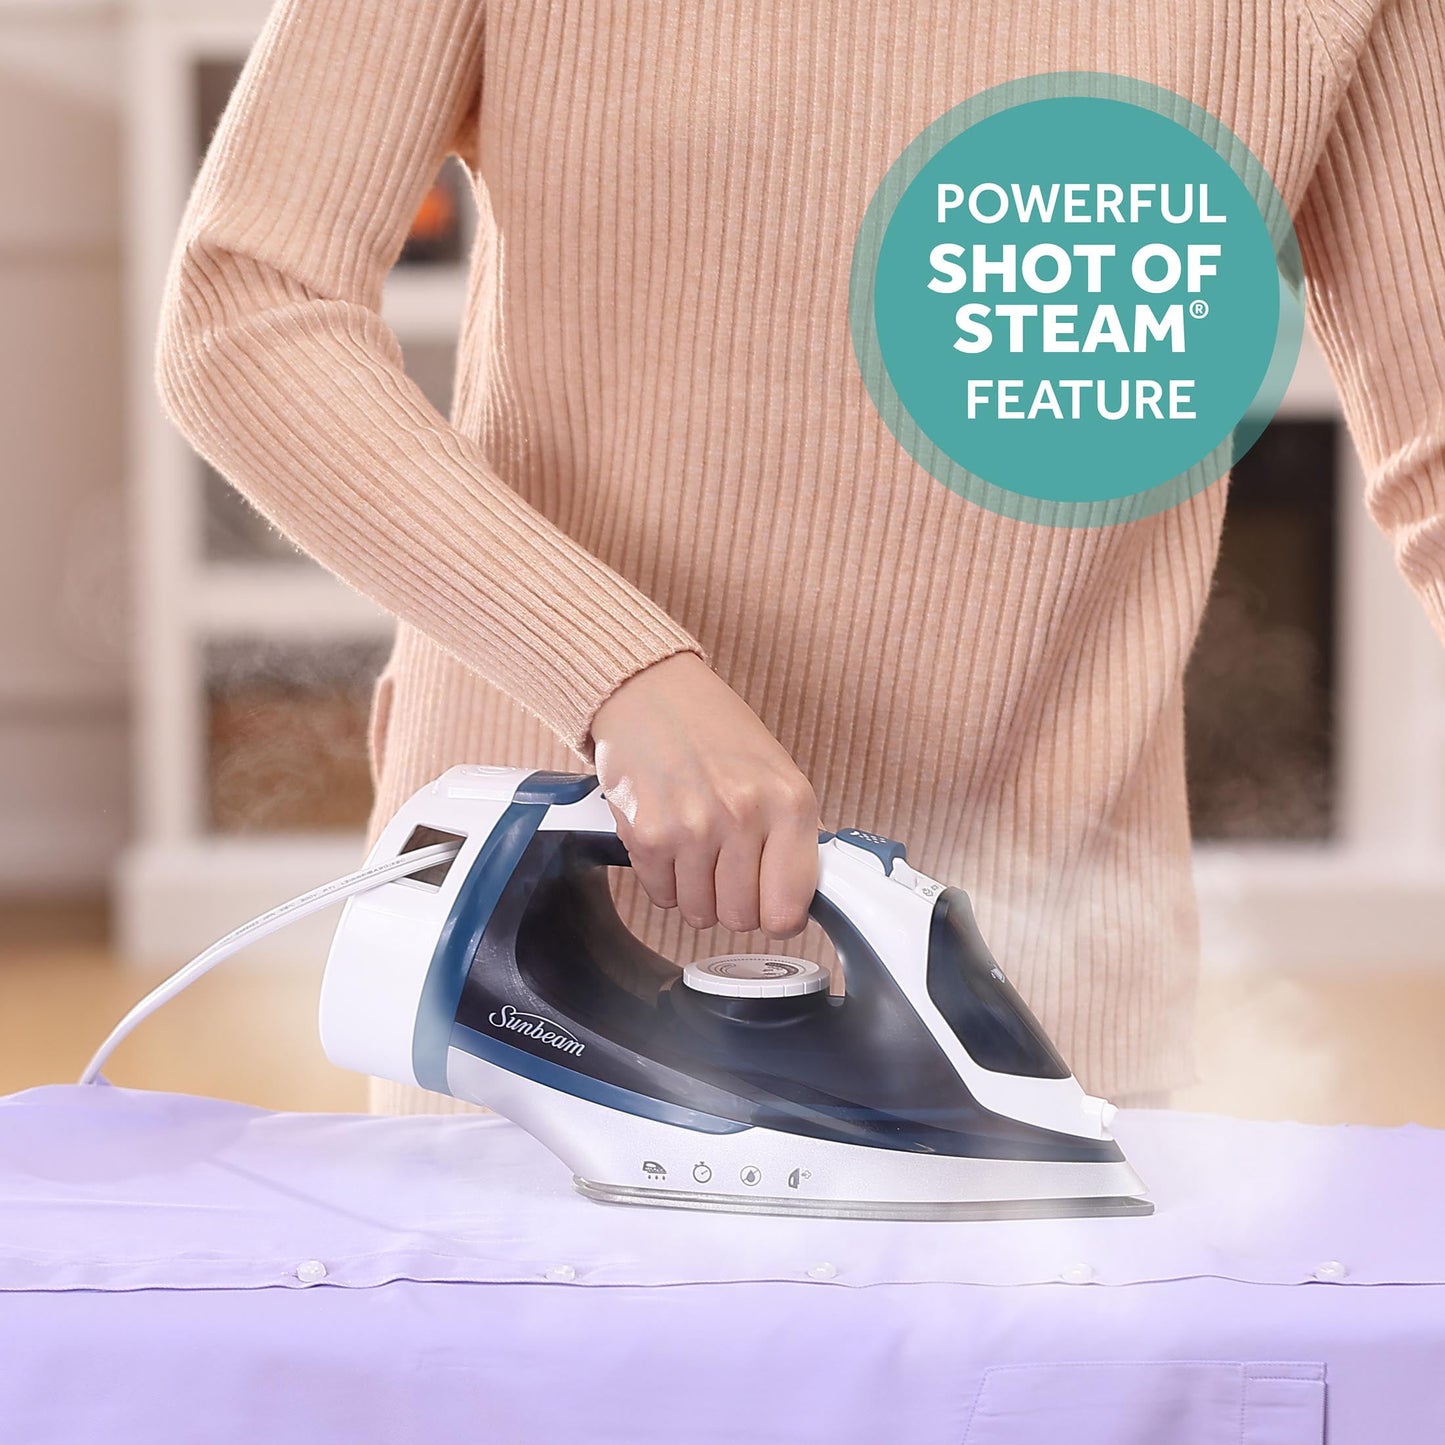 Sunbeam 1700W Steam Iron, Retractable Cord, Shot of Steam Feature, Blue and White Finish